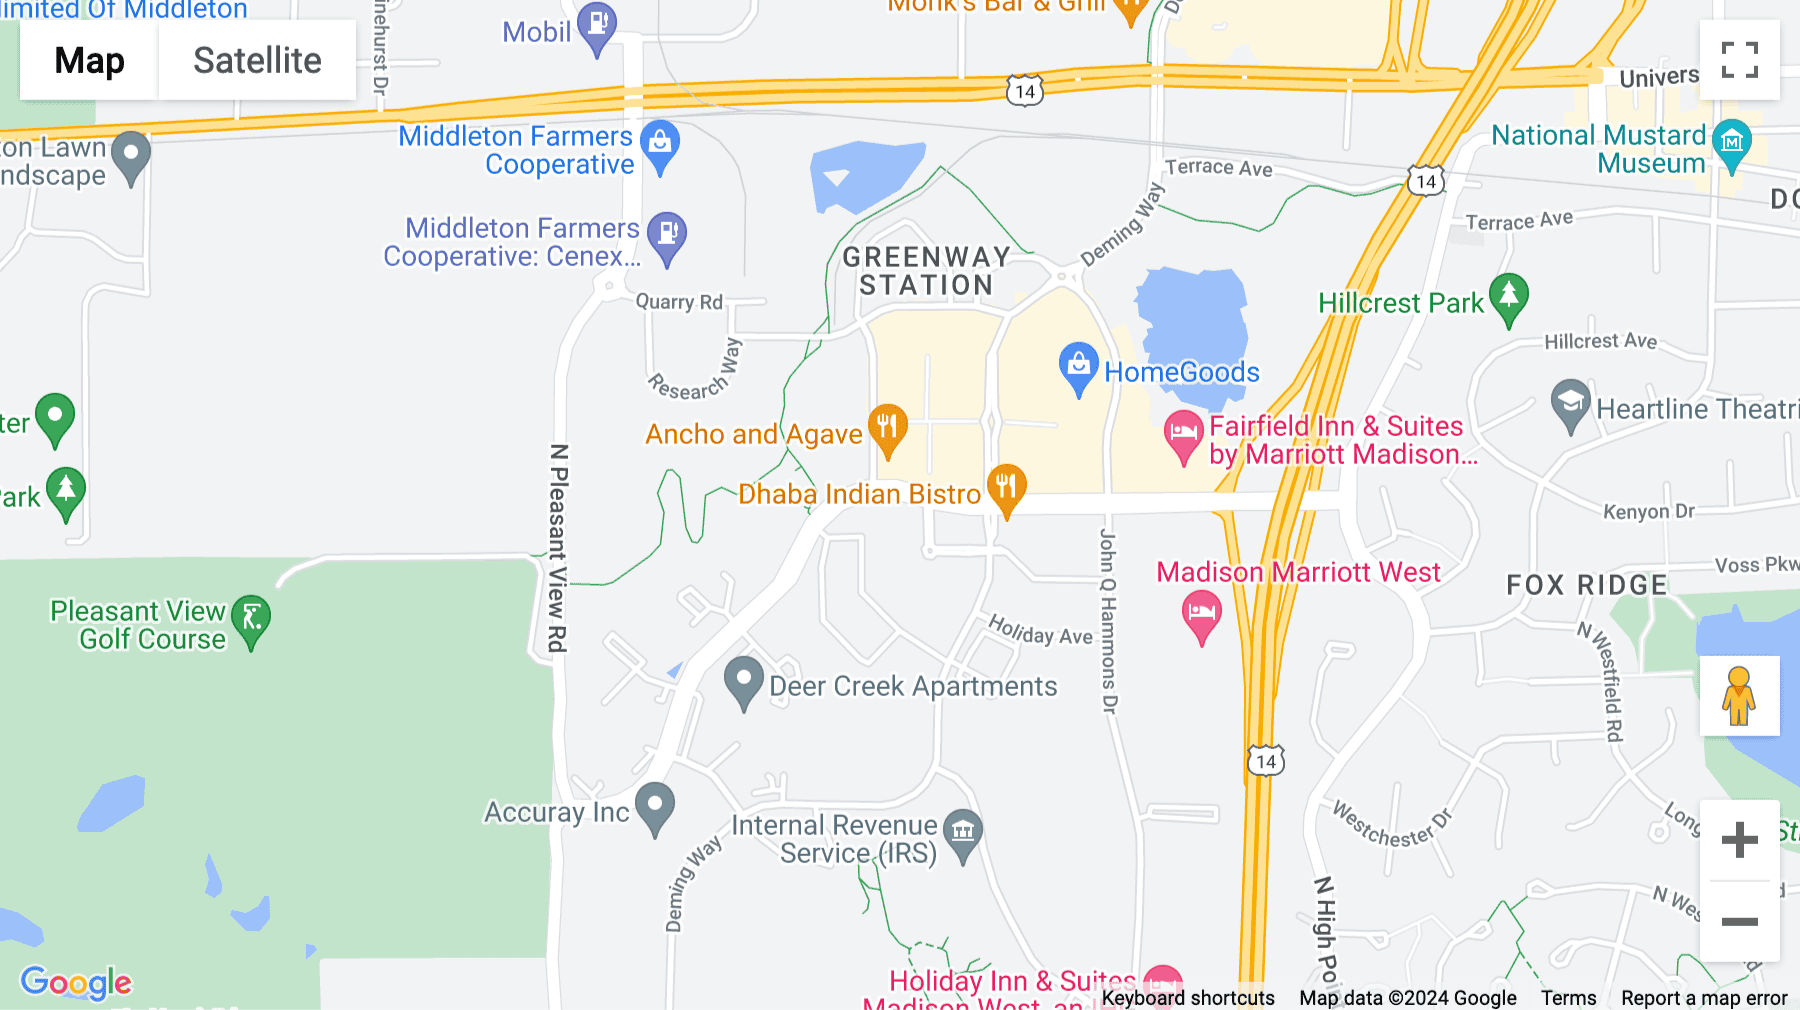 Click for interative map of 8383 Greenway Blvd, Suite 600, Middleton